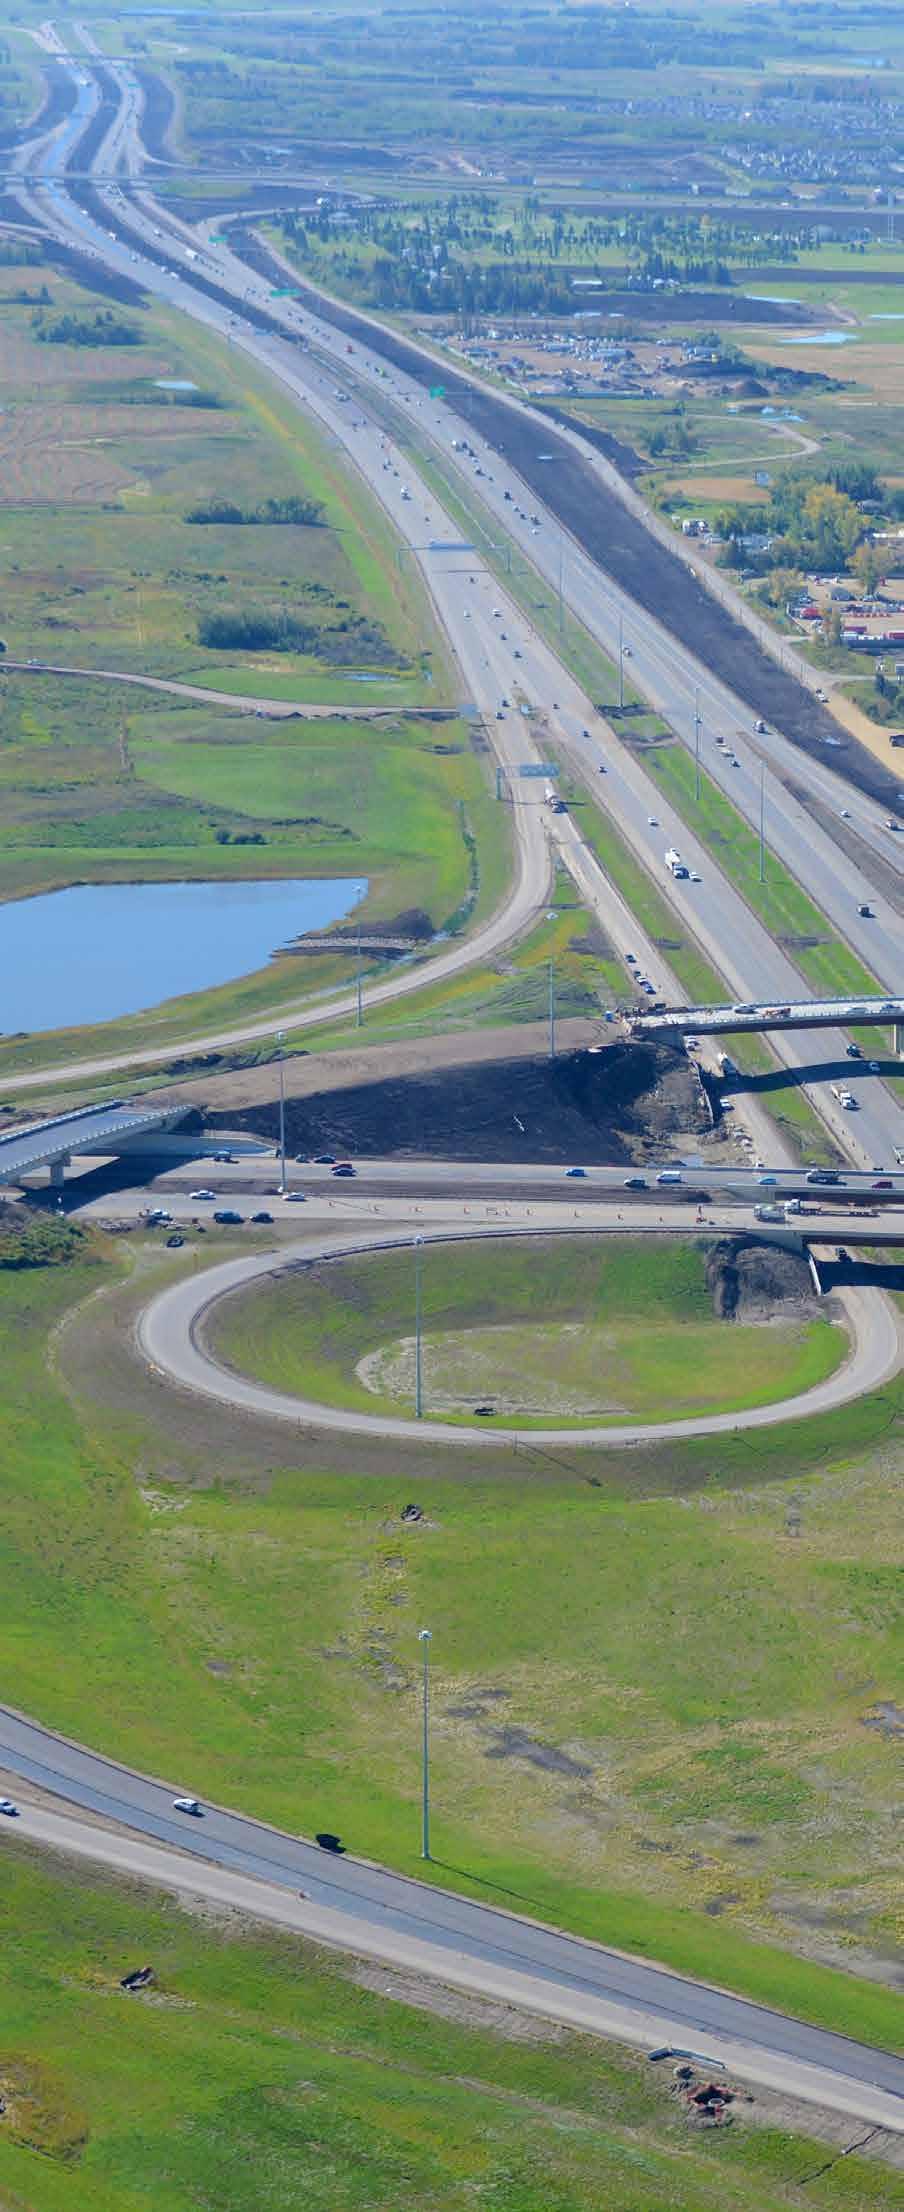 Summary The Northeast Anthony Henday Drive is a $1.8-billion P3 project involving 27 km of new 8-lane freeway with 46 bridge structures to complete Edmonton s ring road.